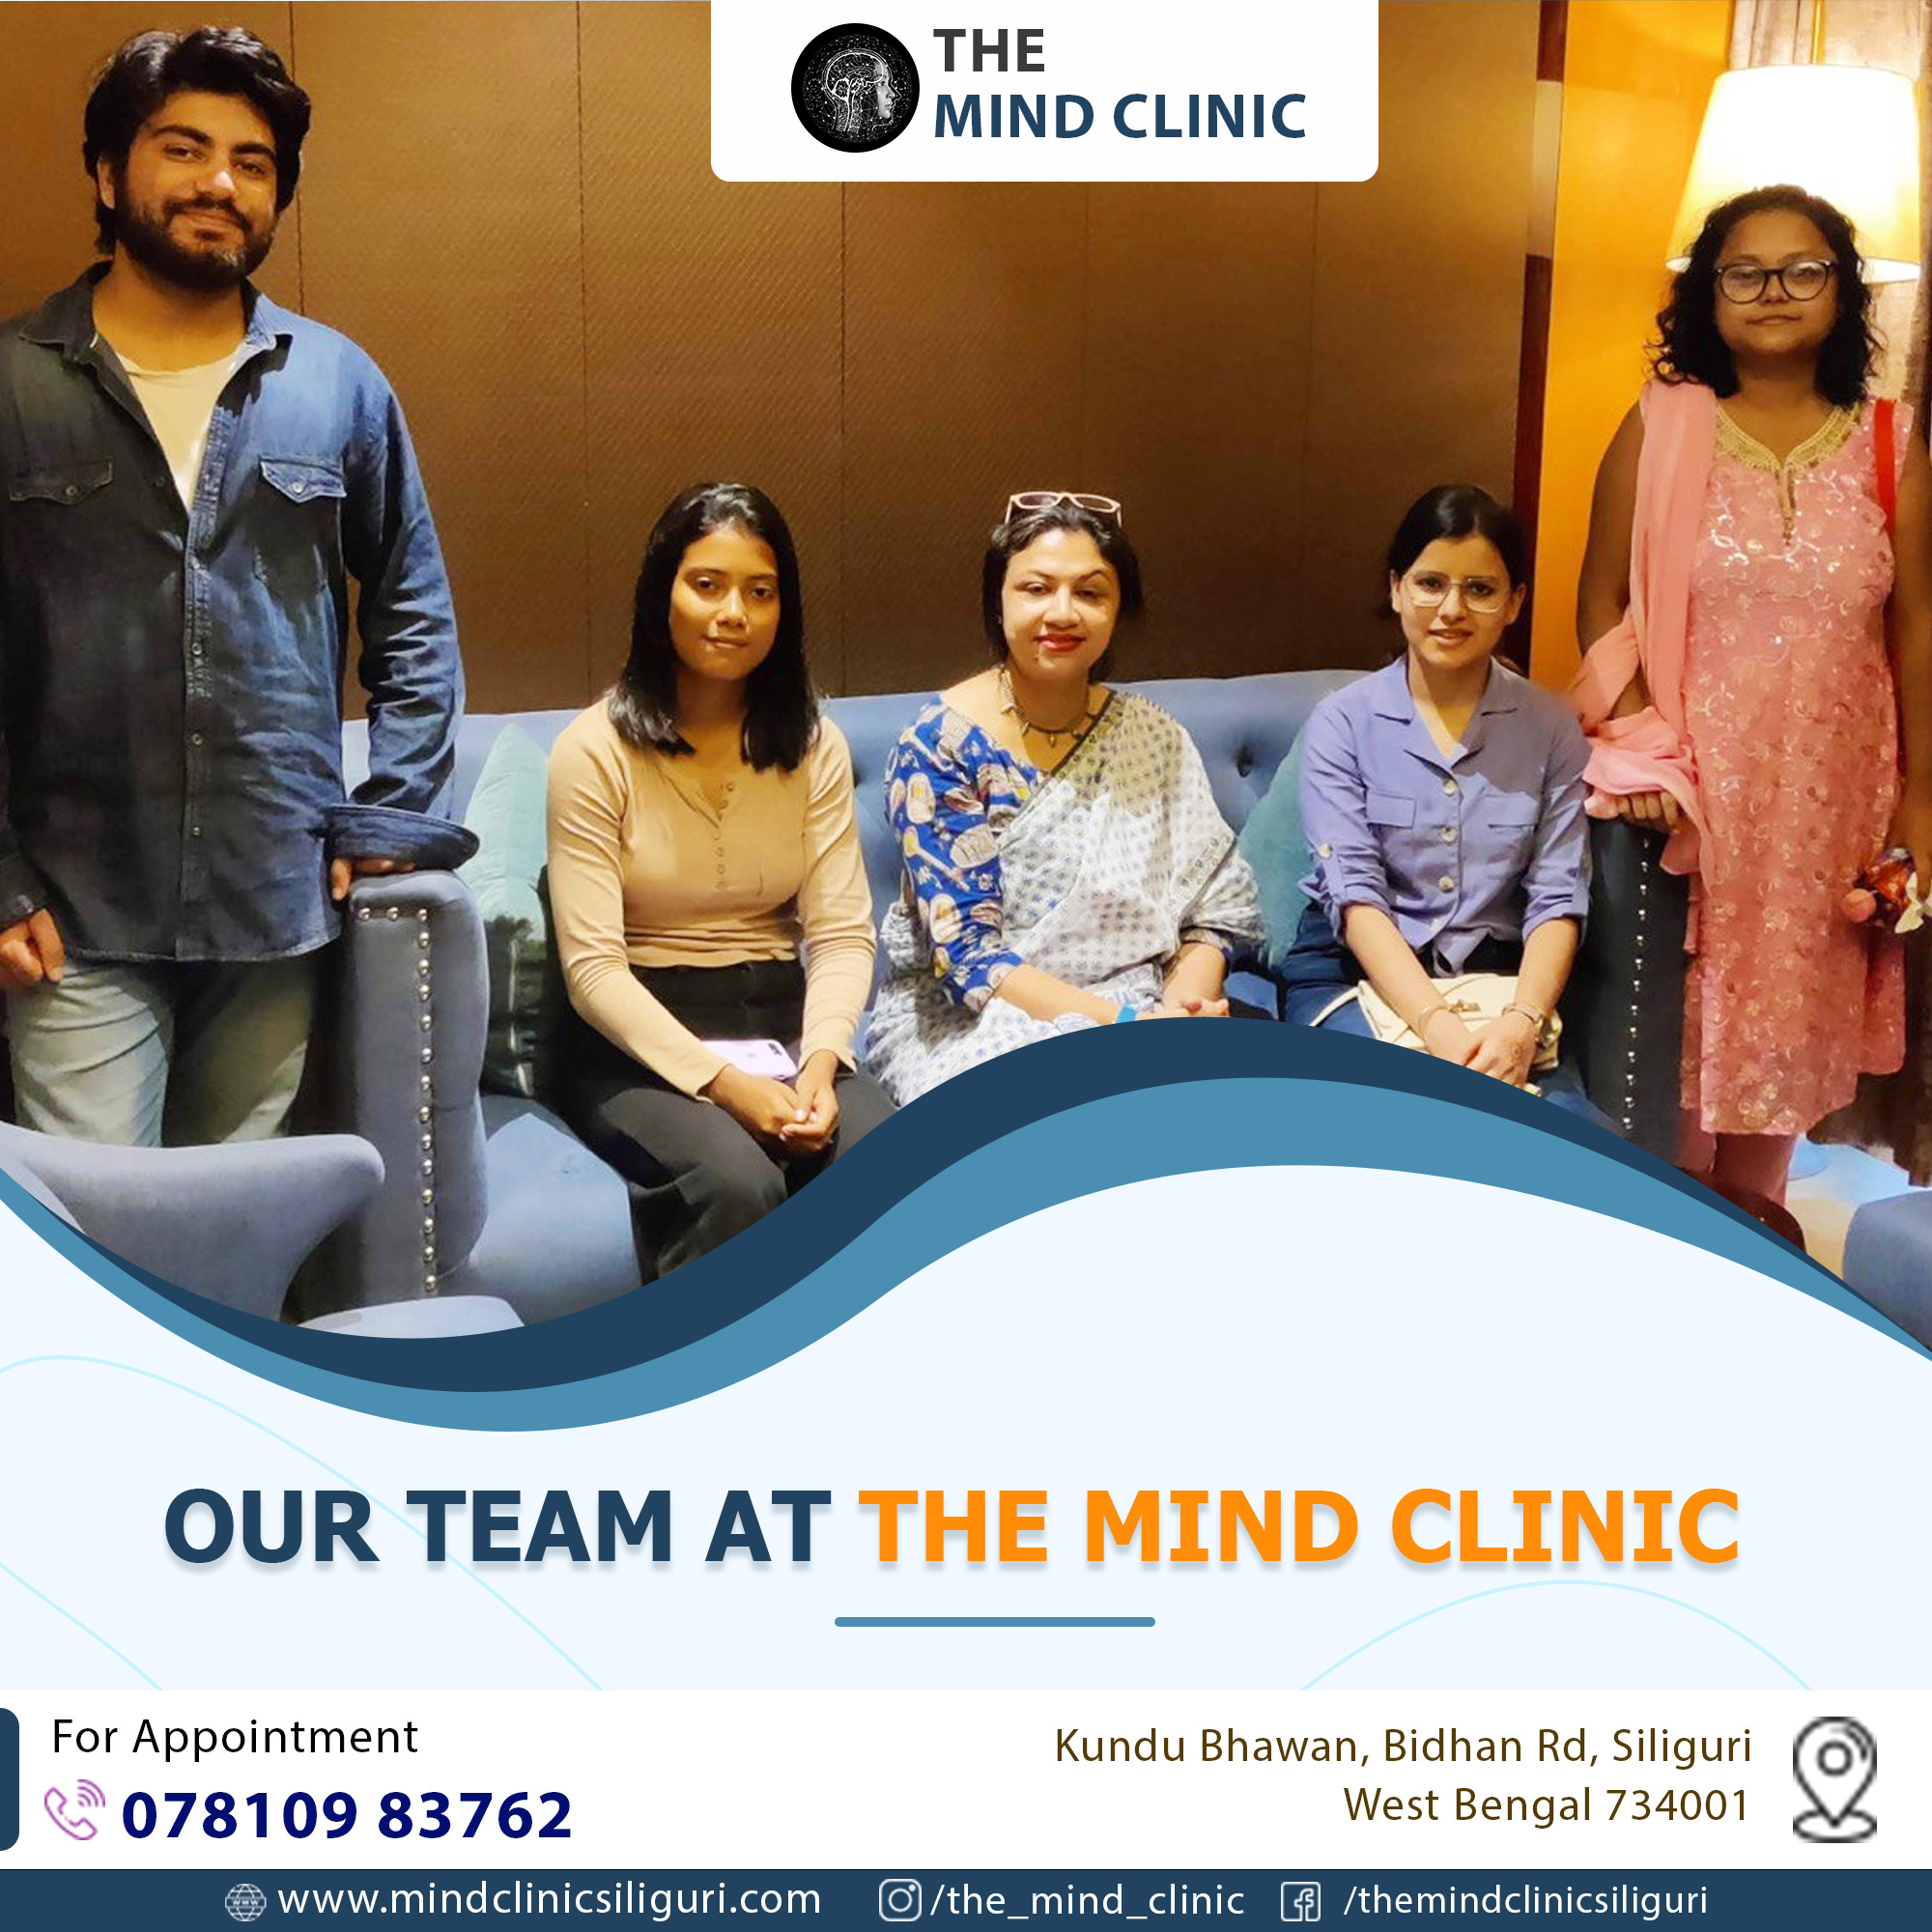 Our team at The Mind Clinic